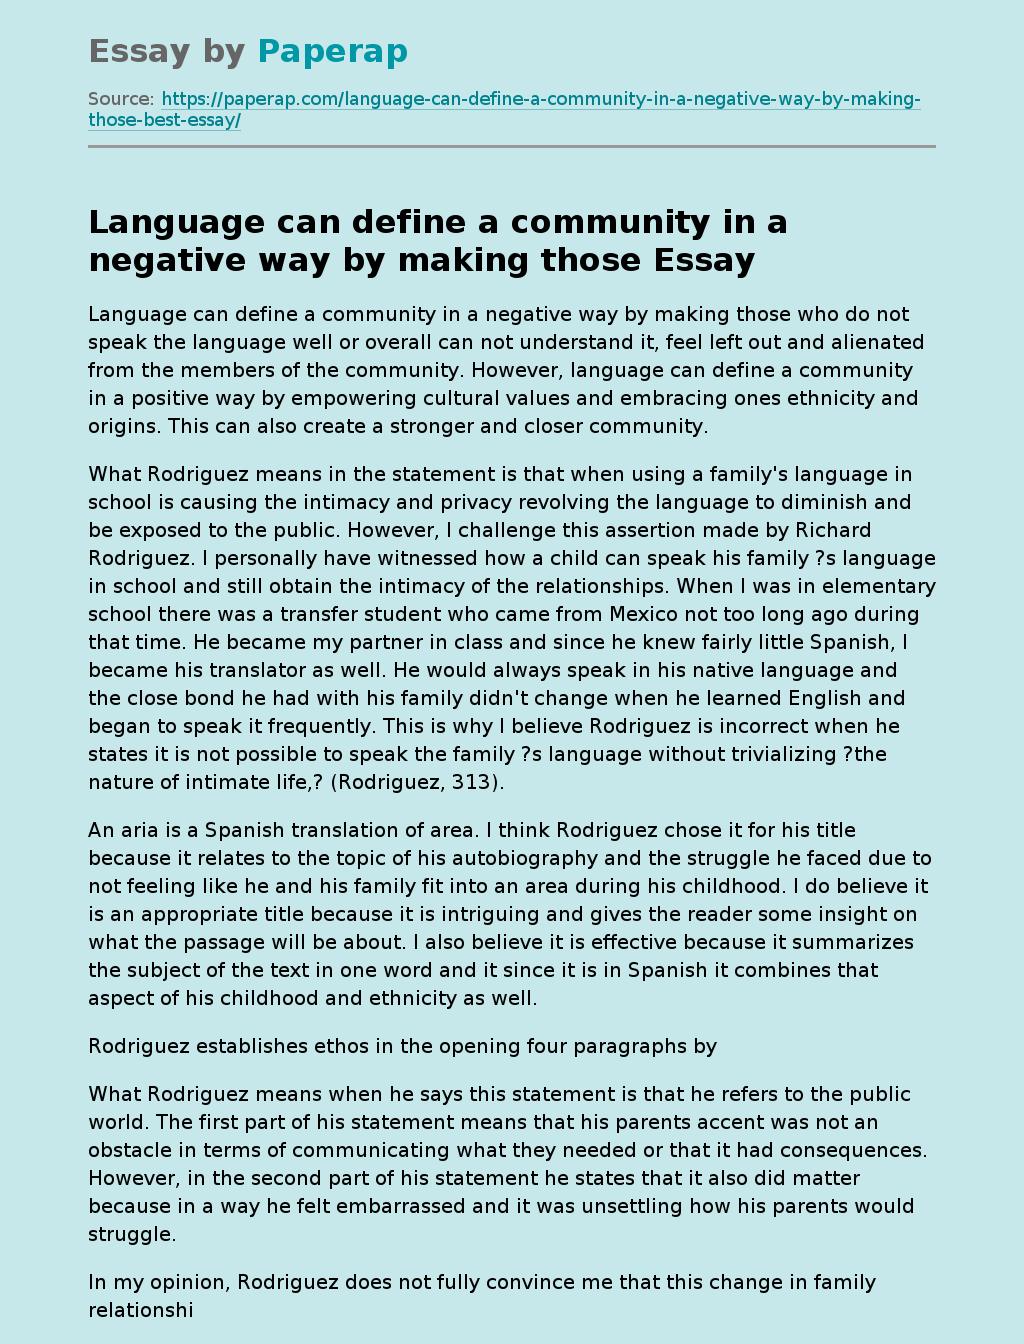 Language can define a community in a negative way by making those